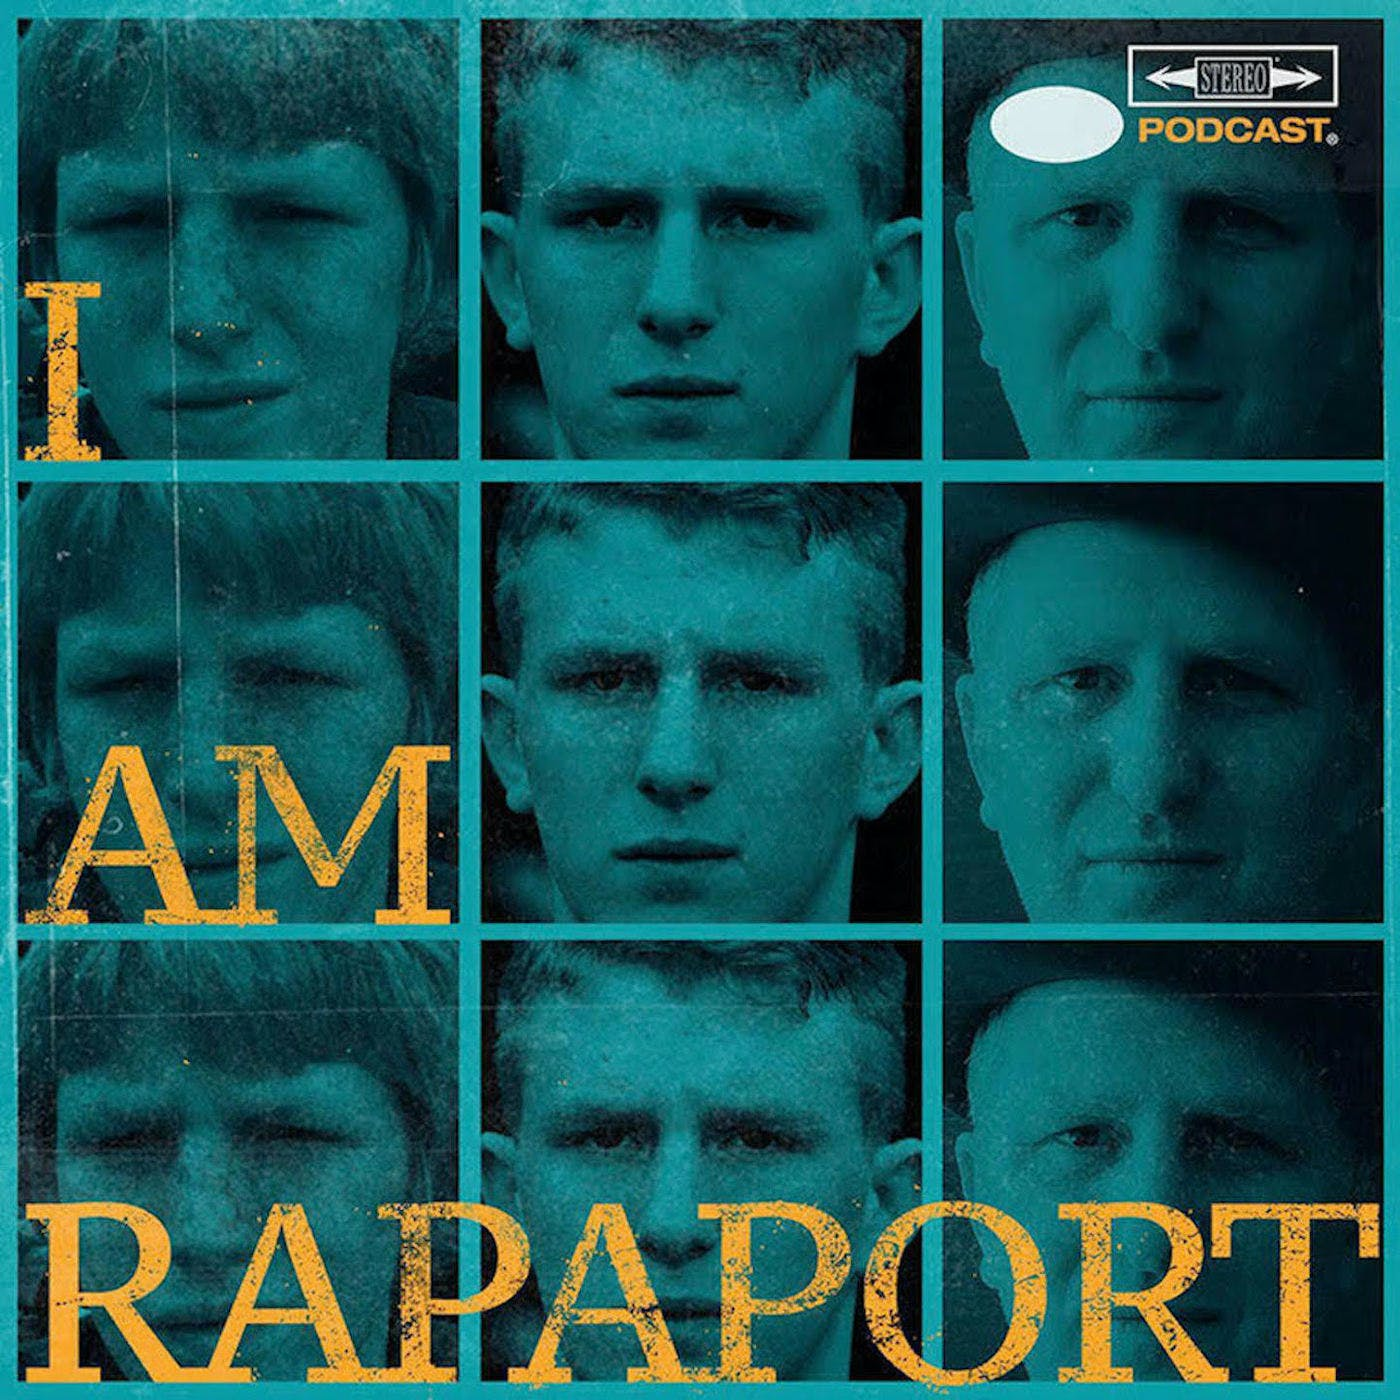 EP 102 - MIKE D (BEASTIE BOYS) I AM RAPAPORT: STEREO PODCAST LIVE!